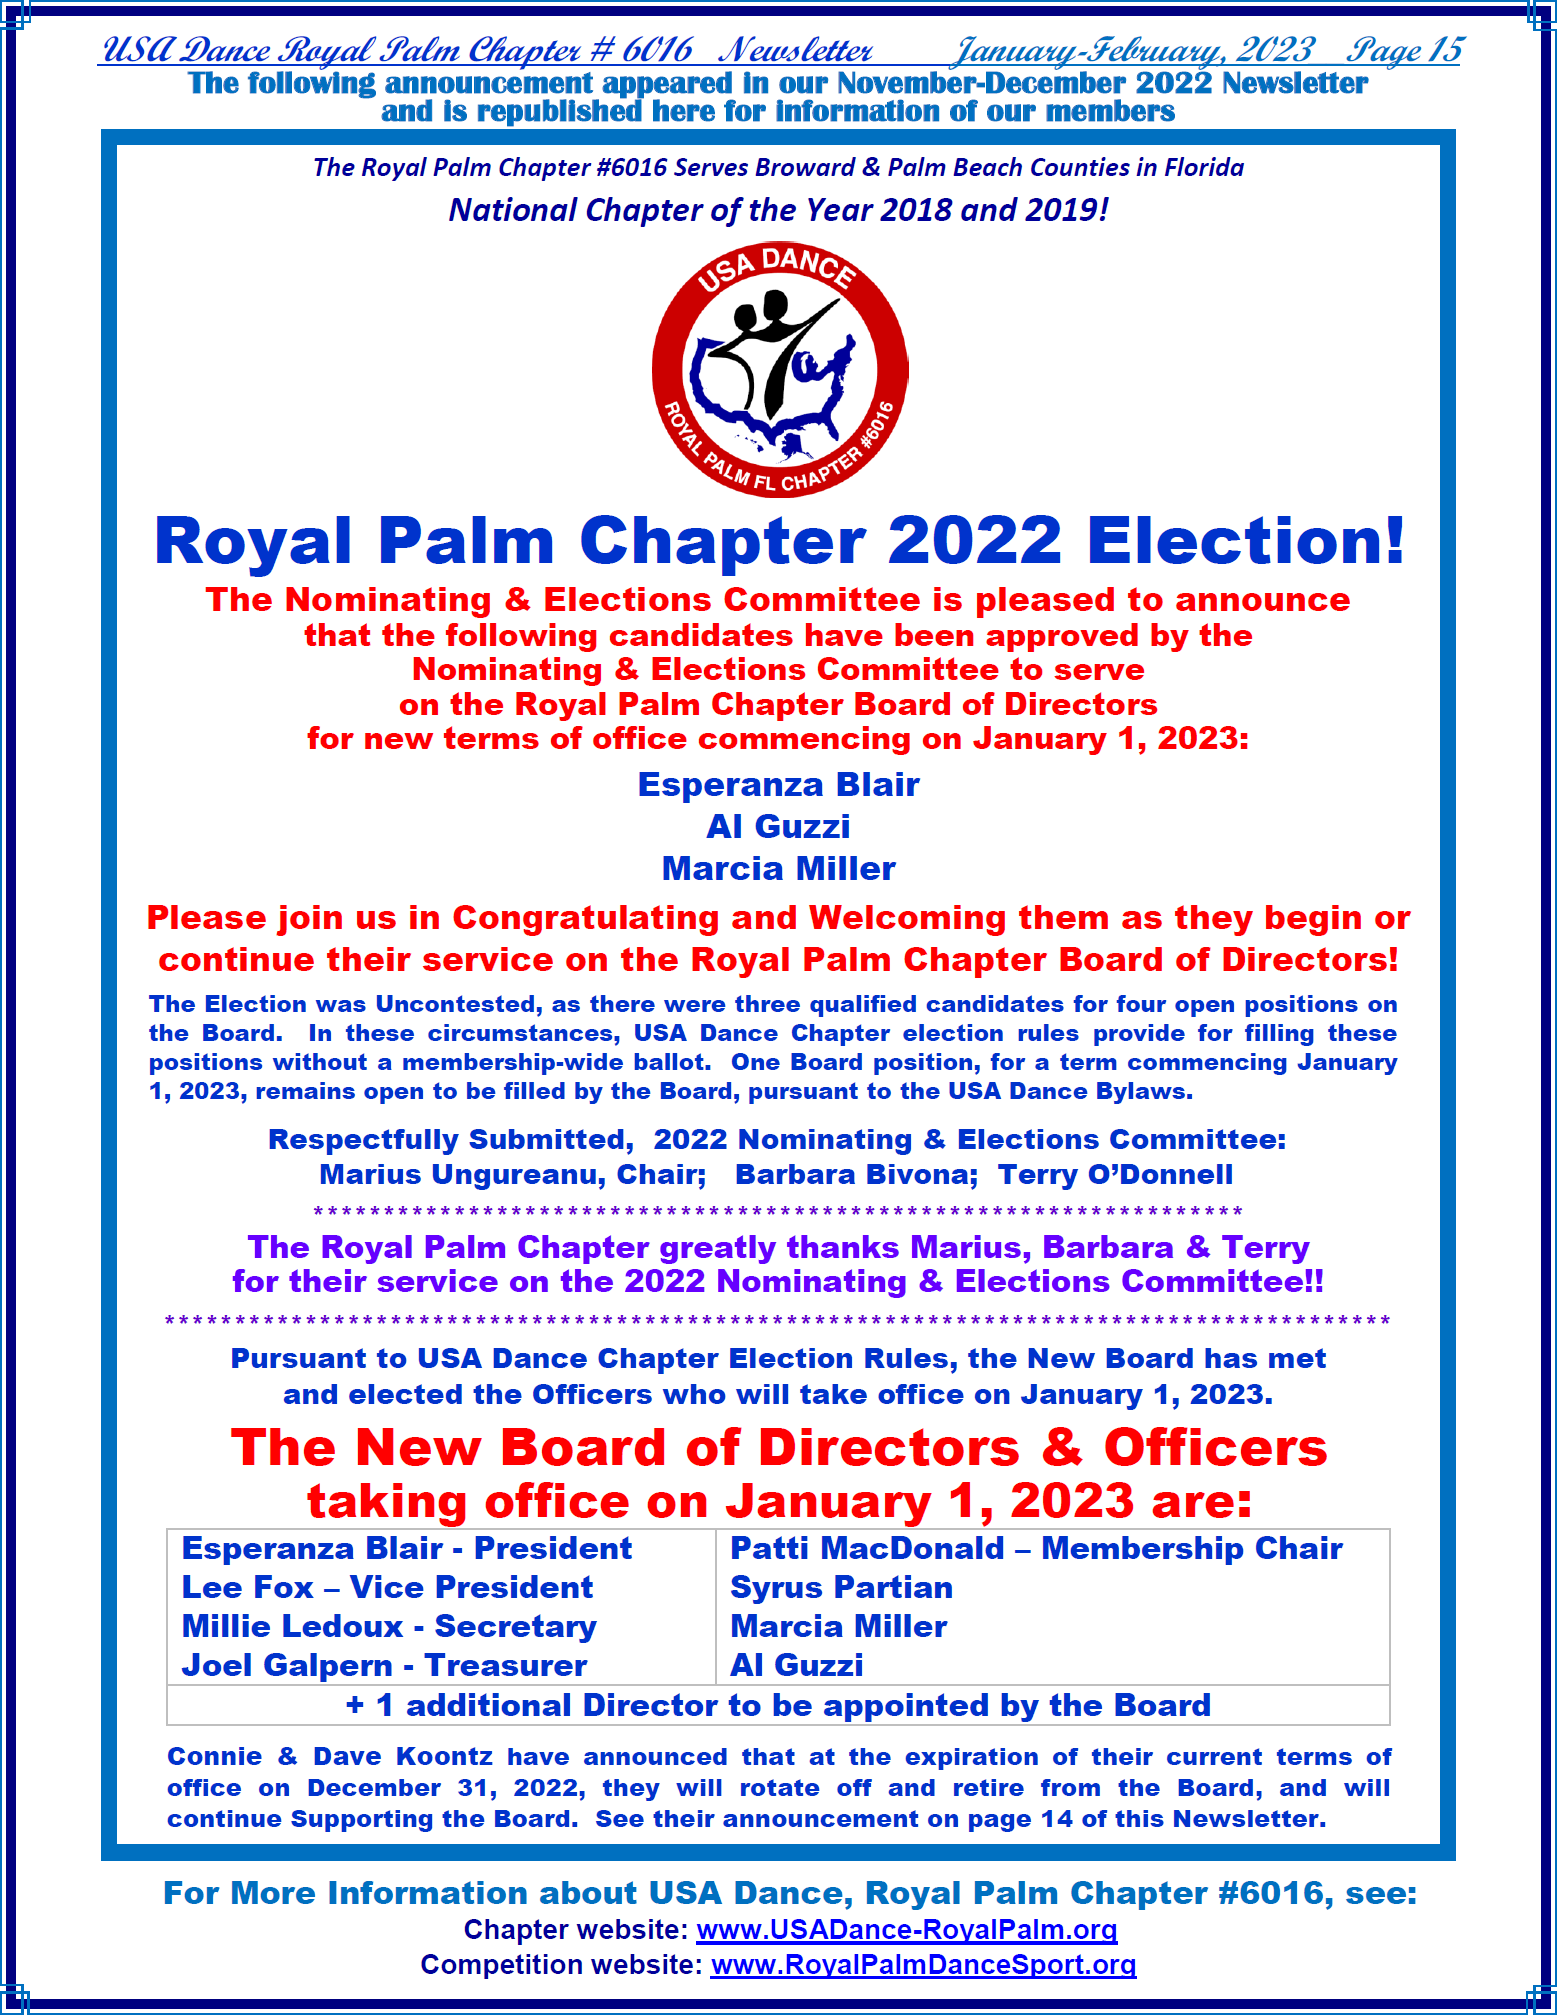 Royal Palm Chapter 2022 Election Results - page 15 Jan-Feb 2023 Newsletter